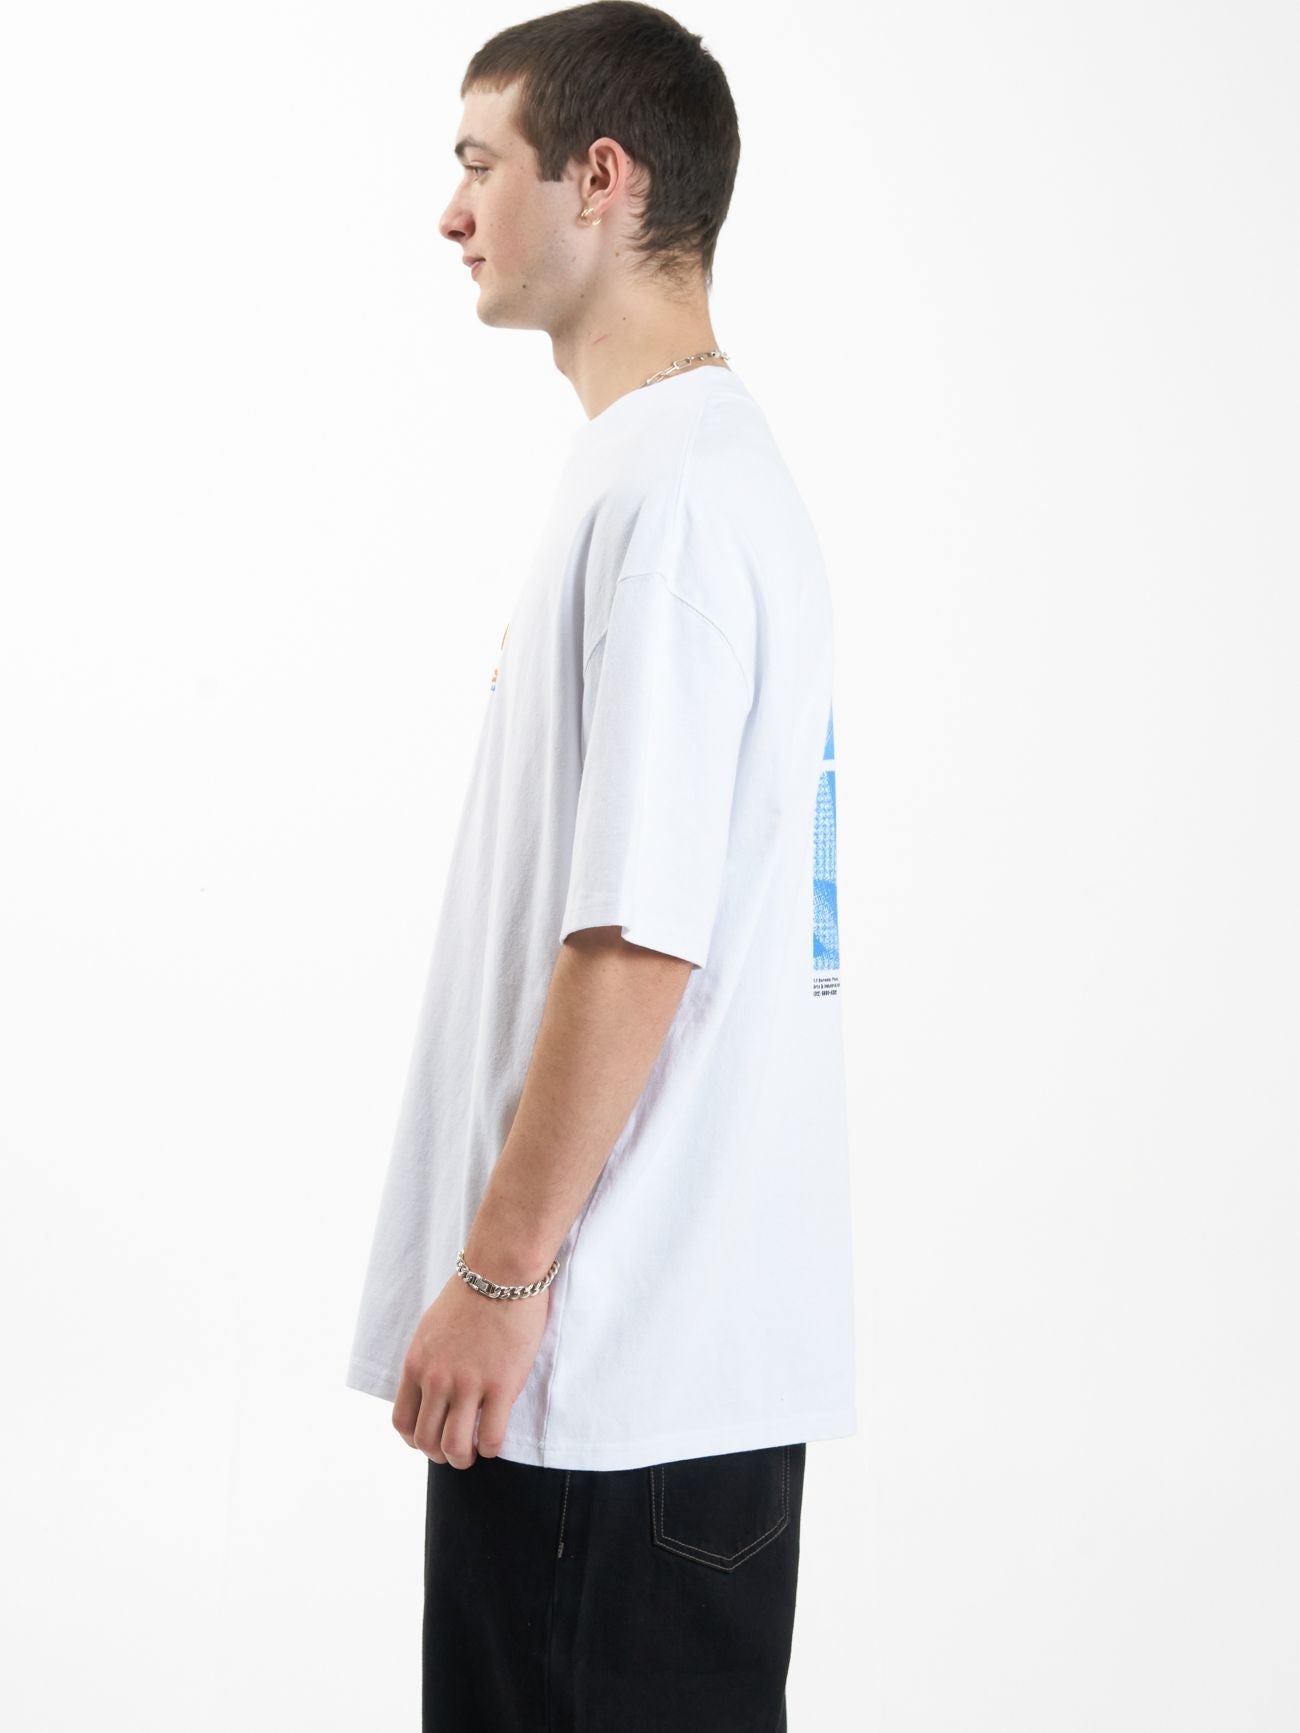 THRILLS - Earthdrone Box Fit ( Oversized Tee ) WHITE